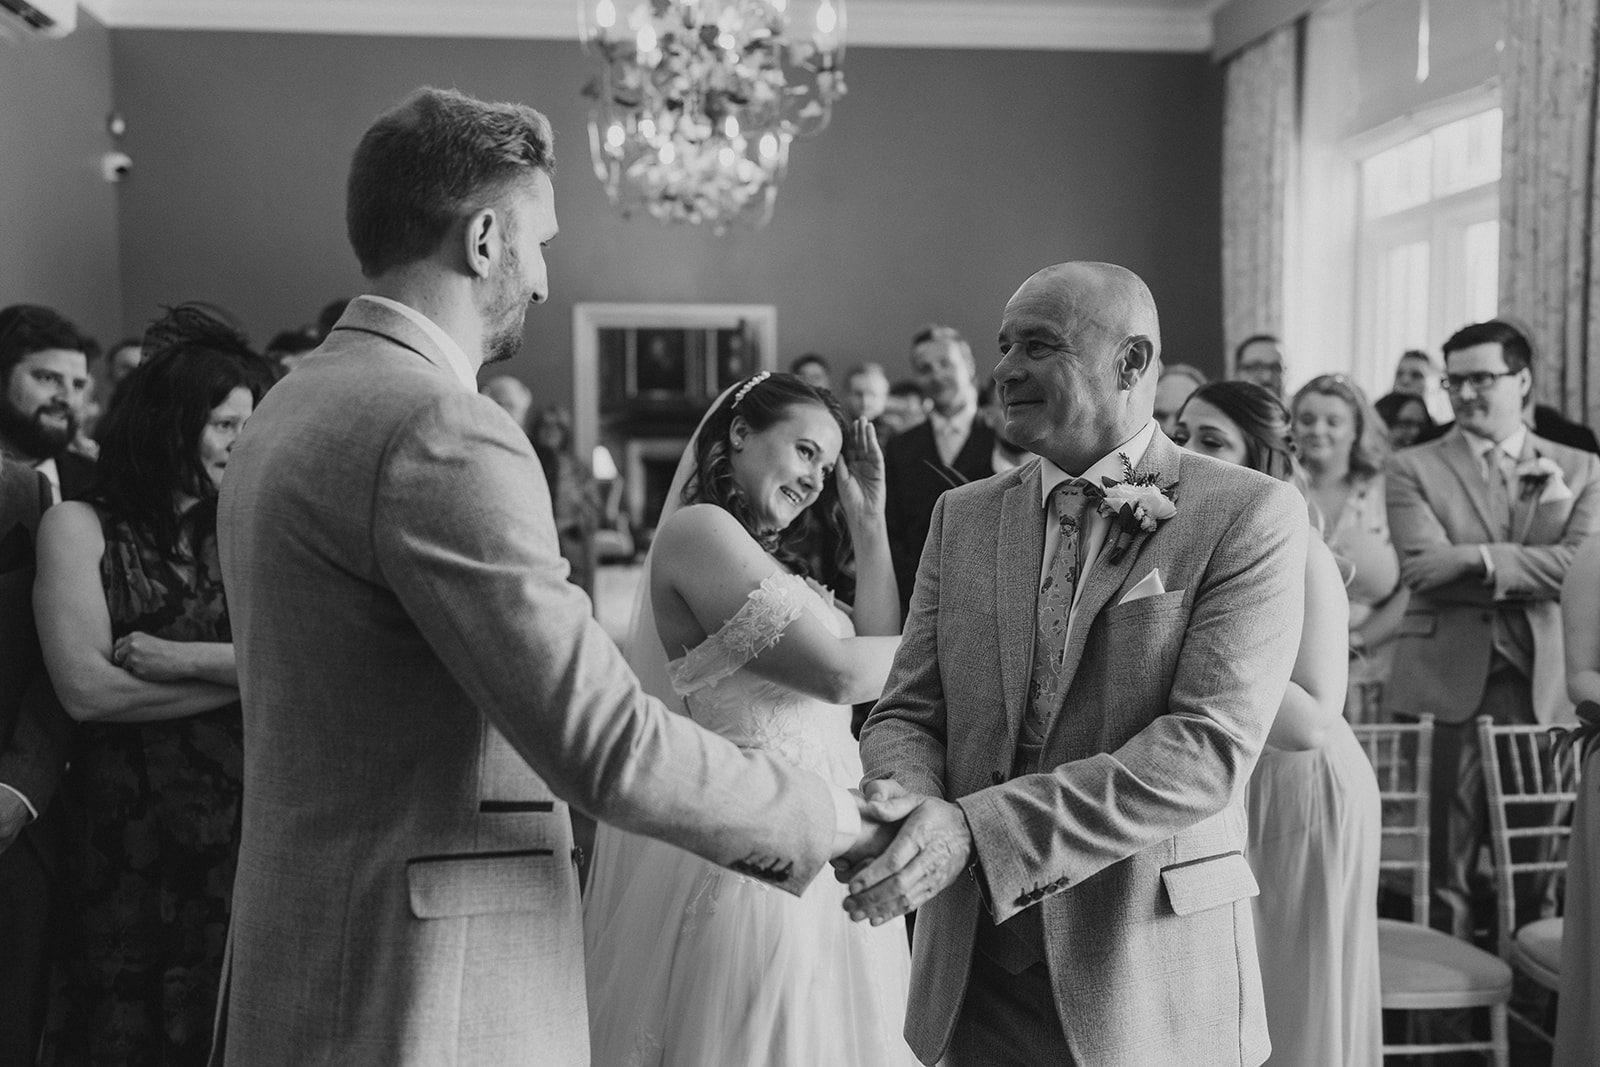 The groom and the father of the bride, shaking hands at the bottom of the wedding aisle